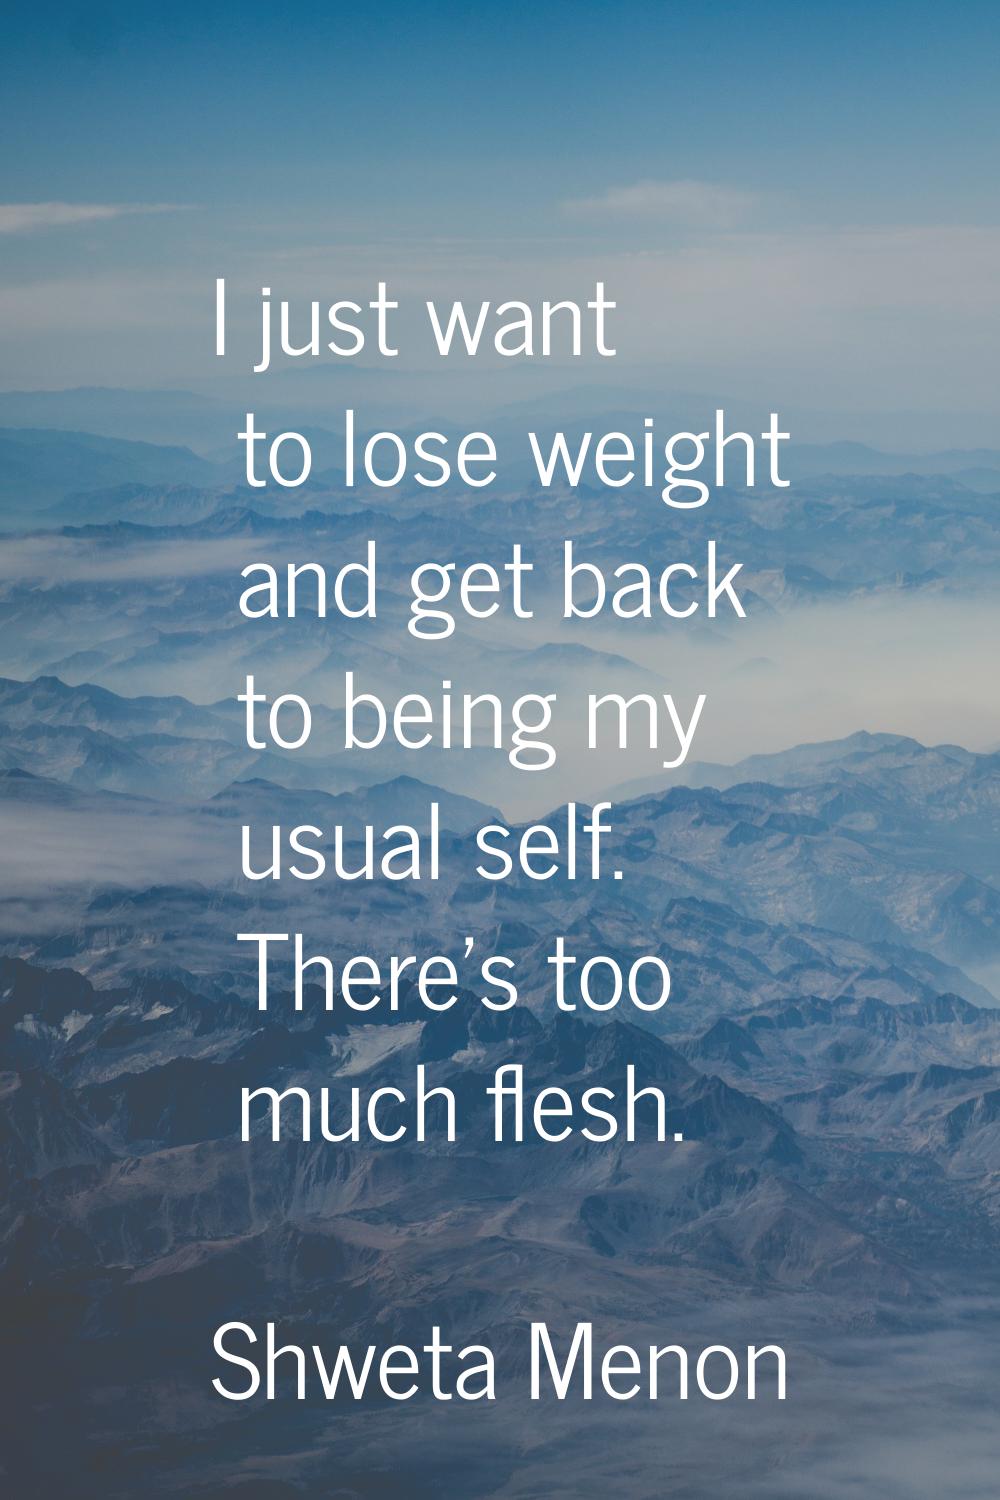 I just want to lose weight and get back to being my usual self. There's too much flesh.